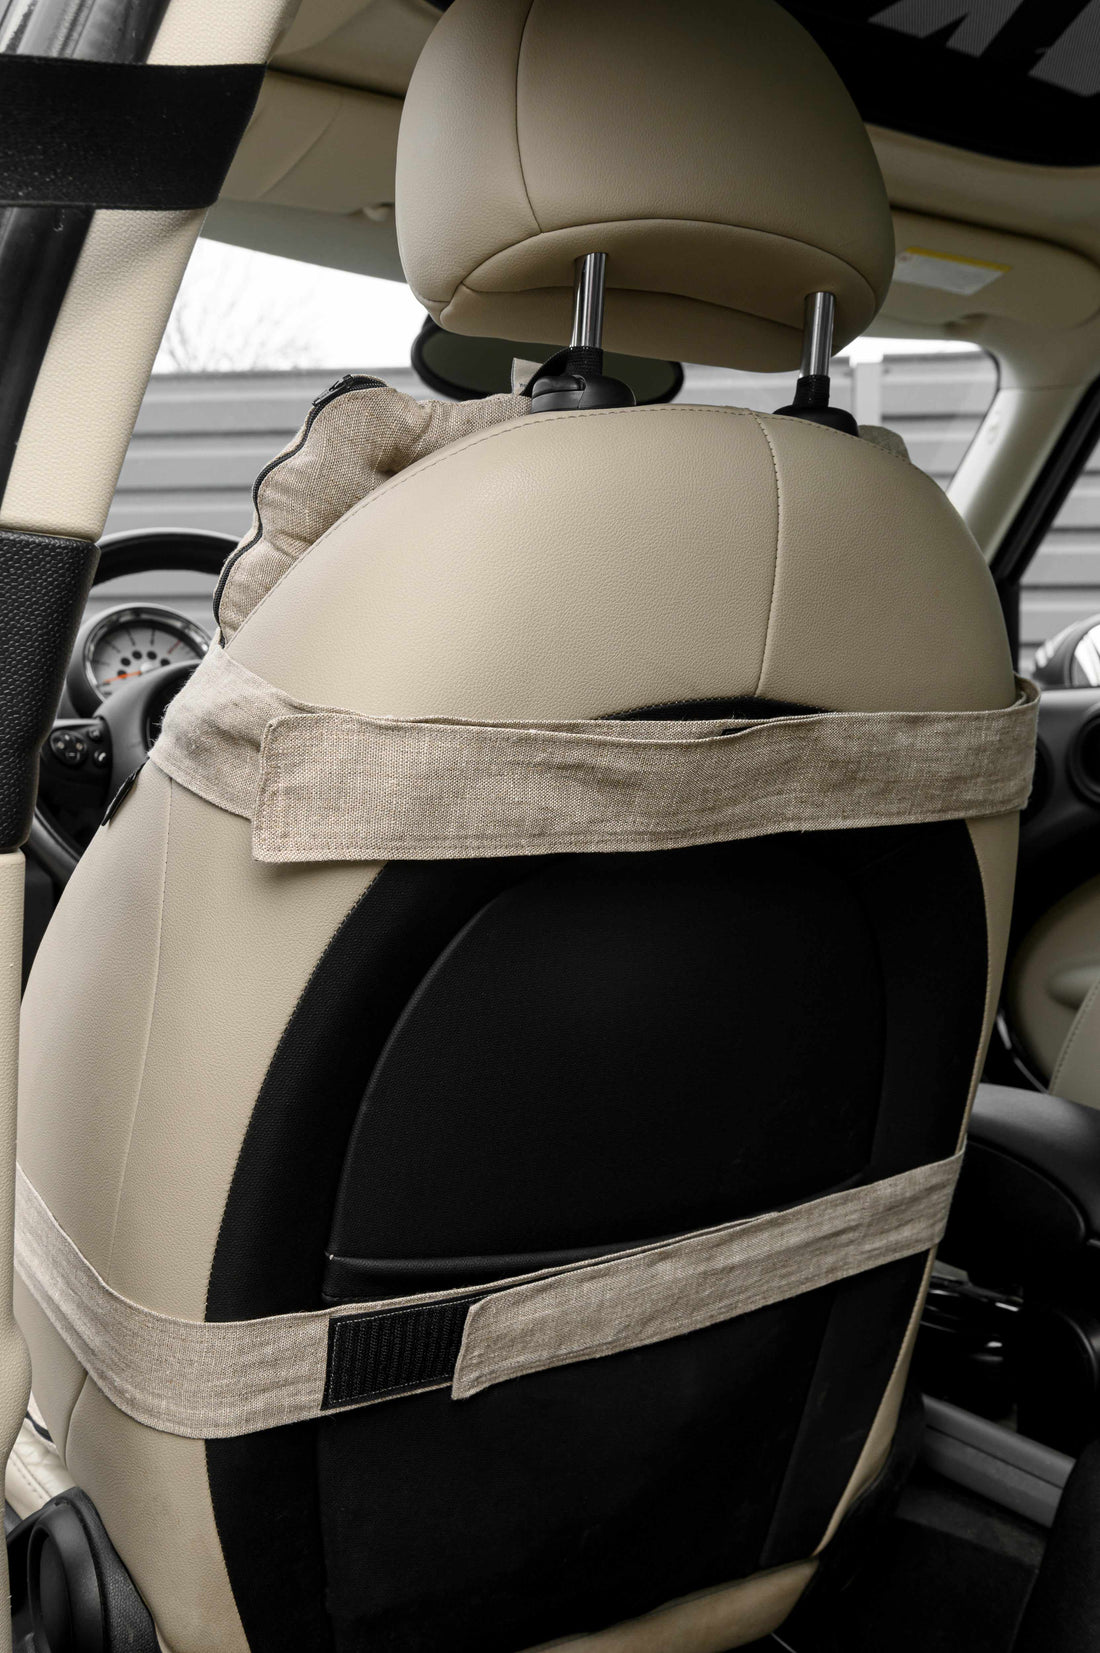 Car Seat Cover,Suninbox Buckwheat Hulls Gray Seat Covers for